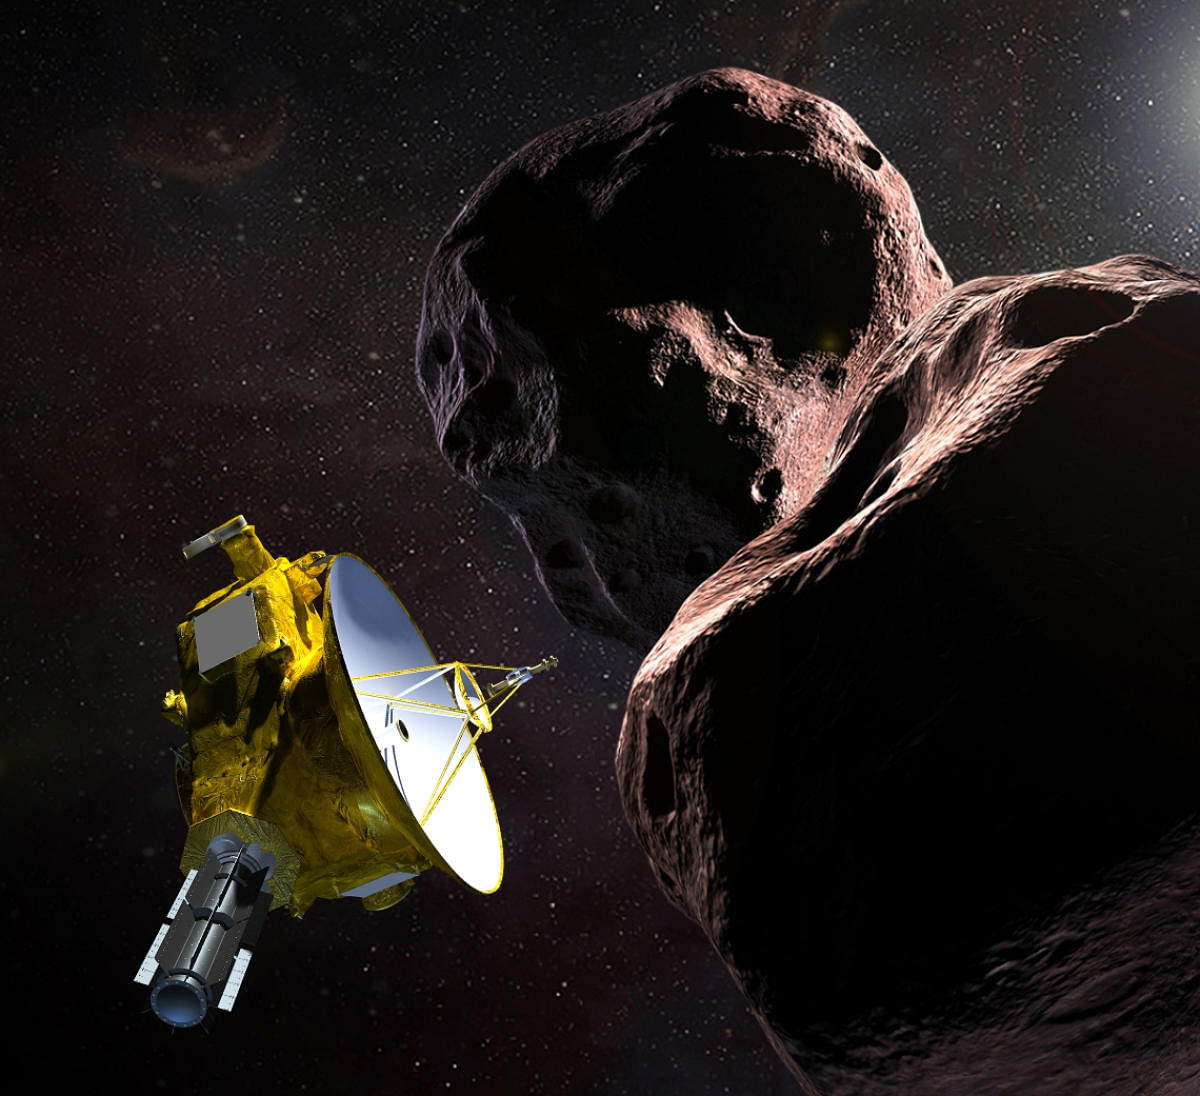 This artist's illustration obtained from NASA on December 21, 2018 shows the New Horizons spacecraft encountering 2014 MU69 – nicknamed “Ultima Thule” – a Kuiper Belt object that orbits one billion miles beyond Pluto. (Photo by HO / NASA/JHUAPL/SwRI / AFP)